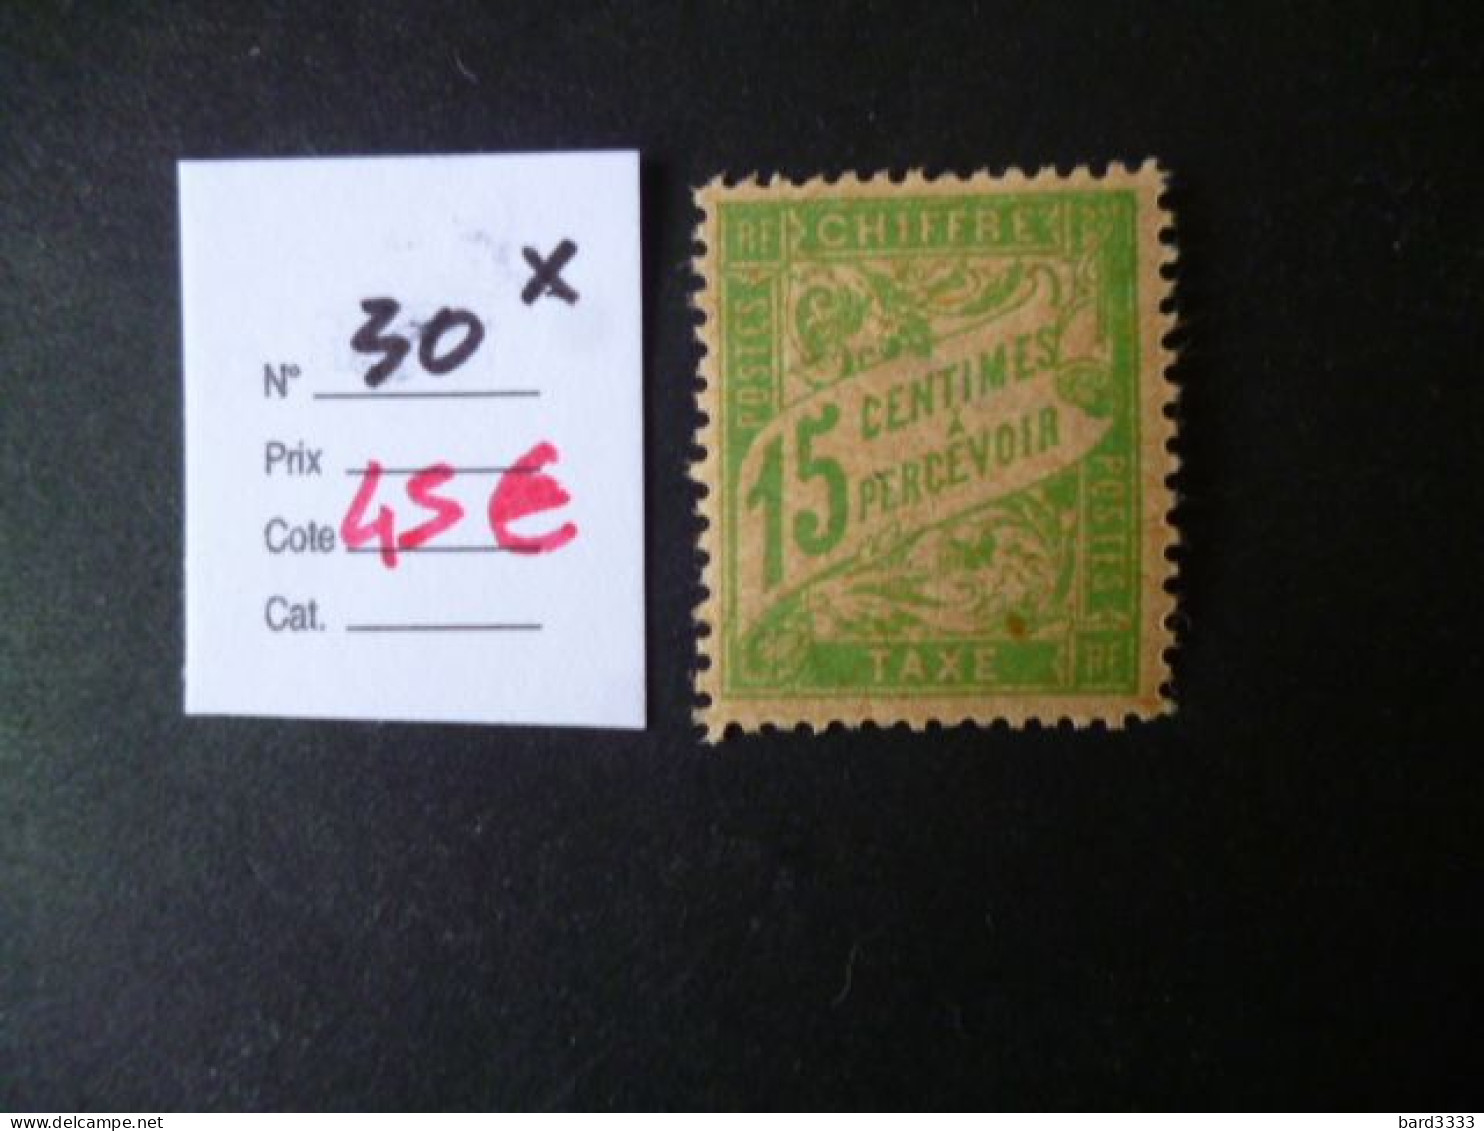 Timbre France Neuf * Taxe N° 30 Cote 45 € - 1859-1959 Neufs